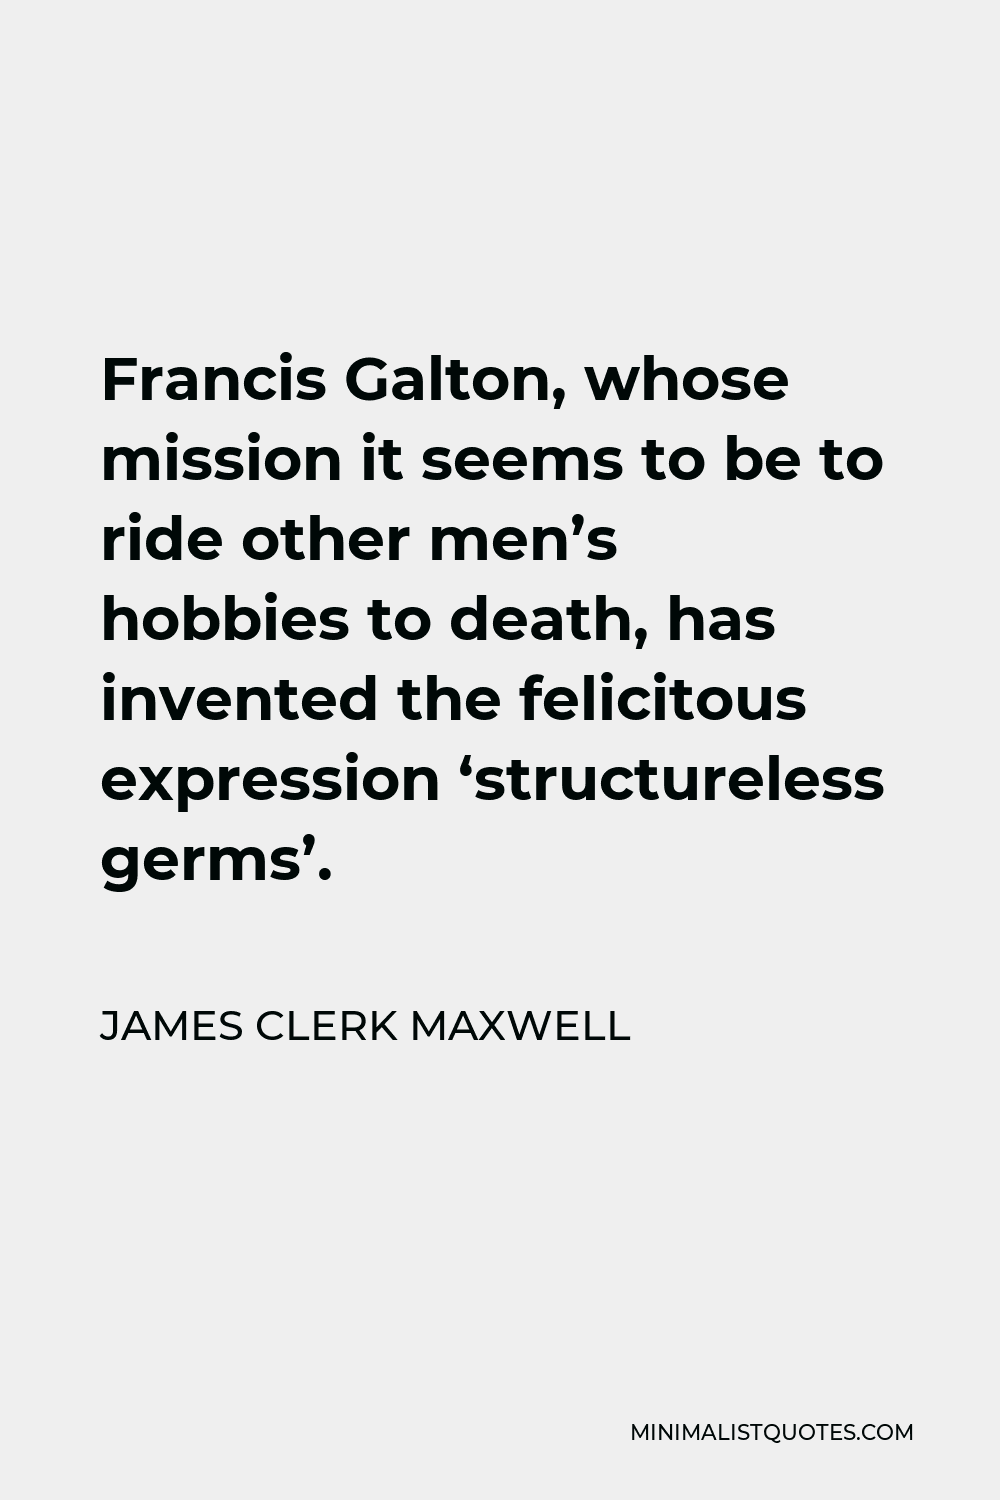 James Clerk Maxwell Quote - Francis Galton, whose mission it seems to be to ride other men’s hobbies to death, has invented the felicitous expression ‘structureless germs’.